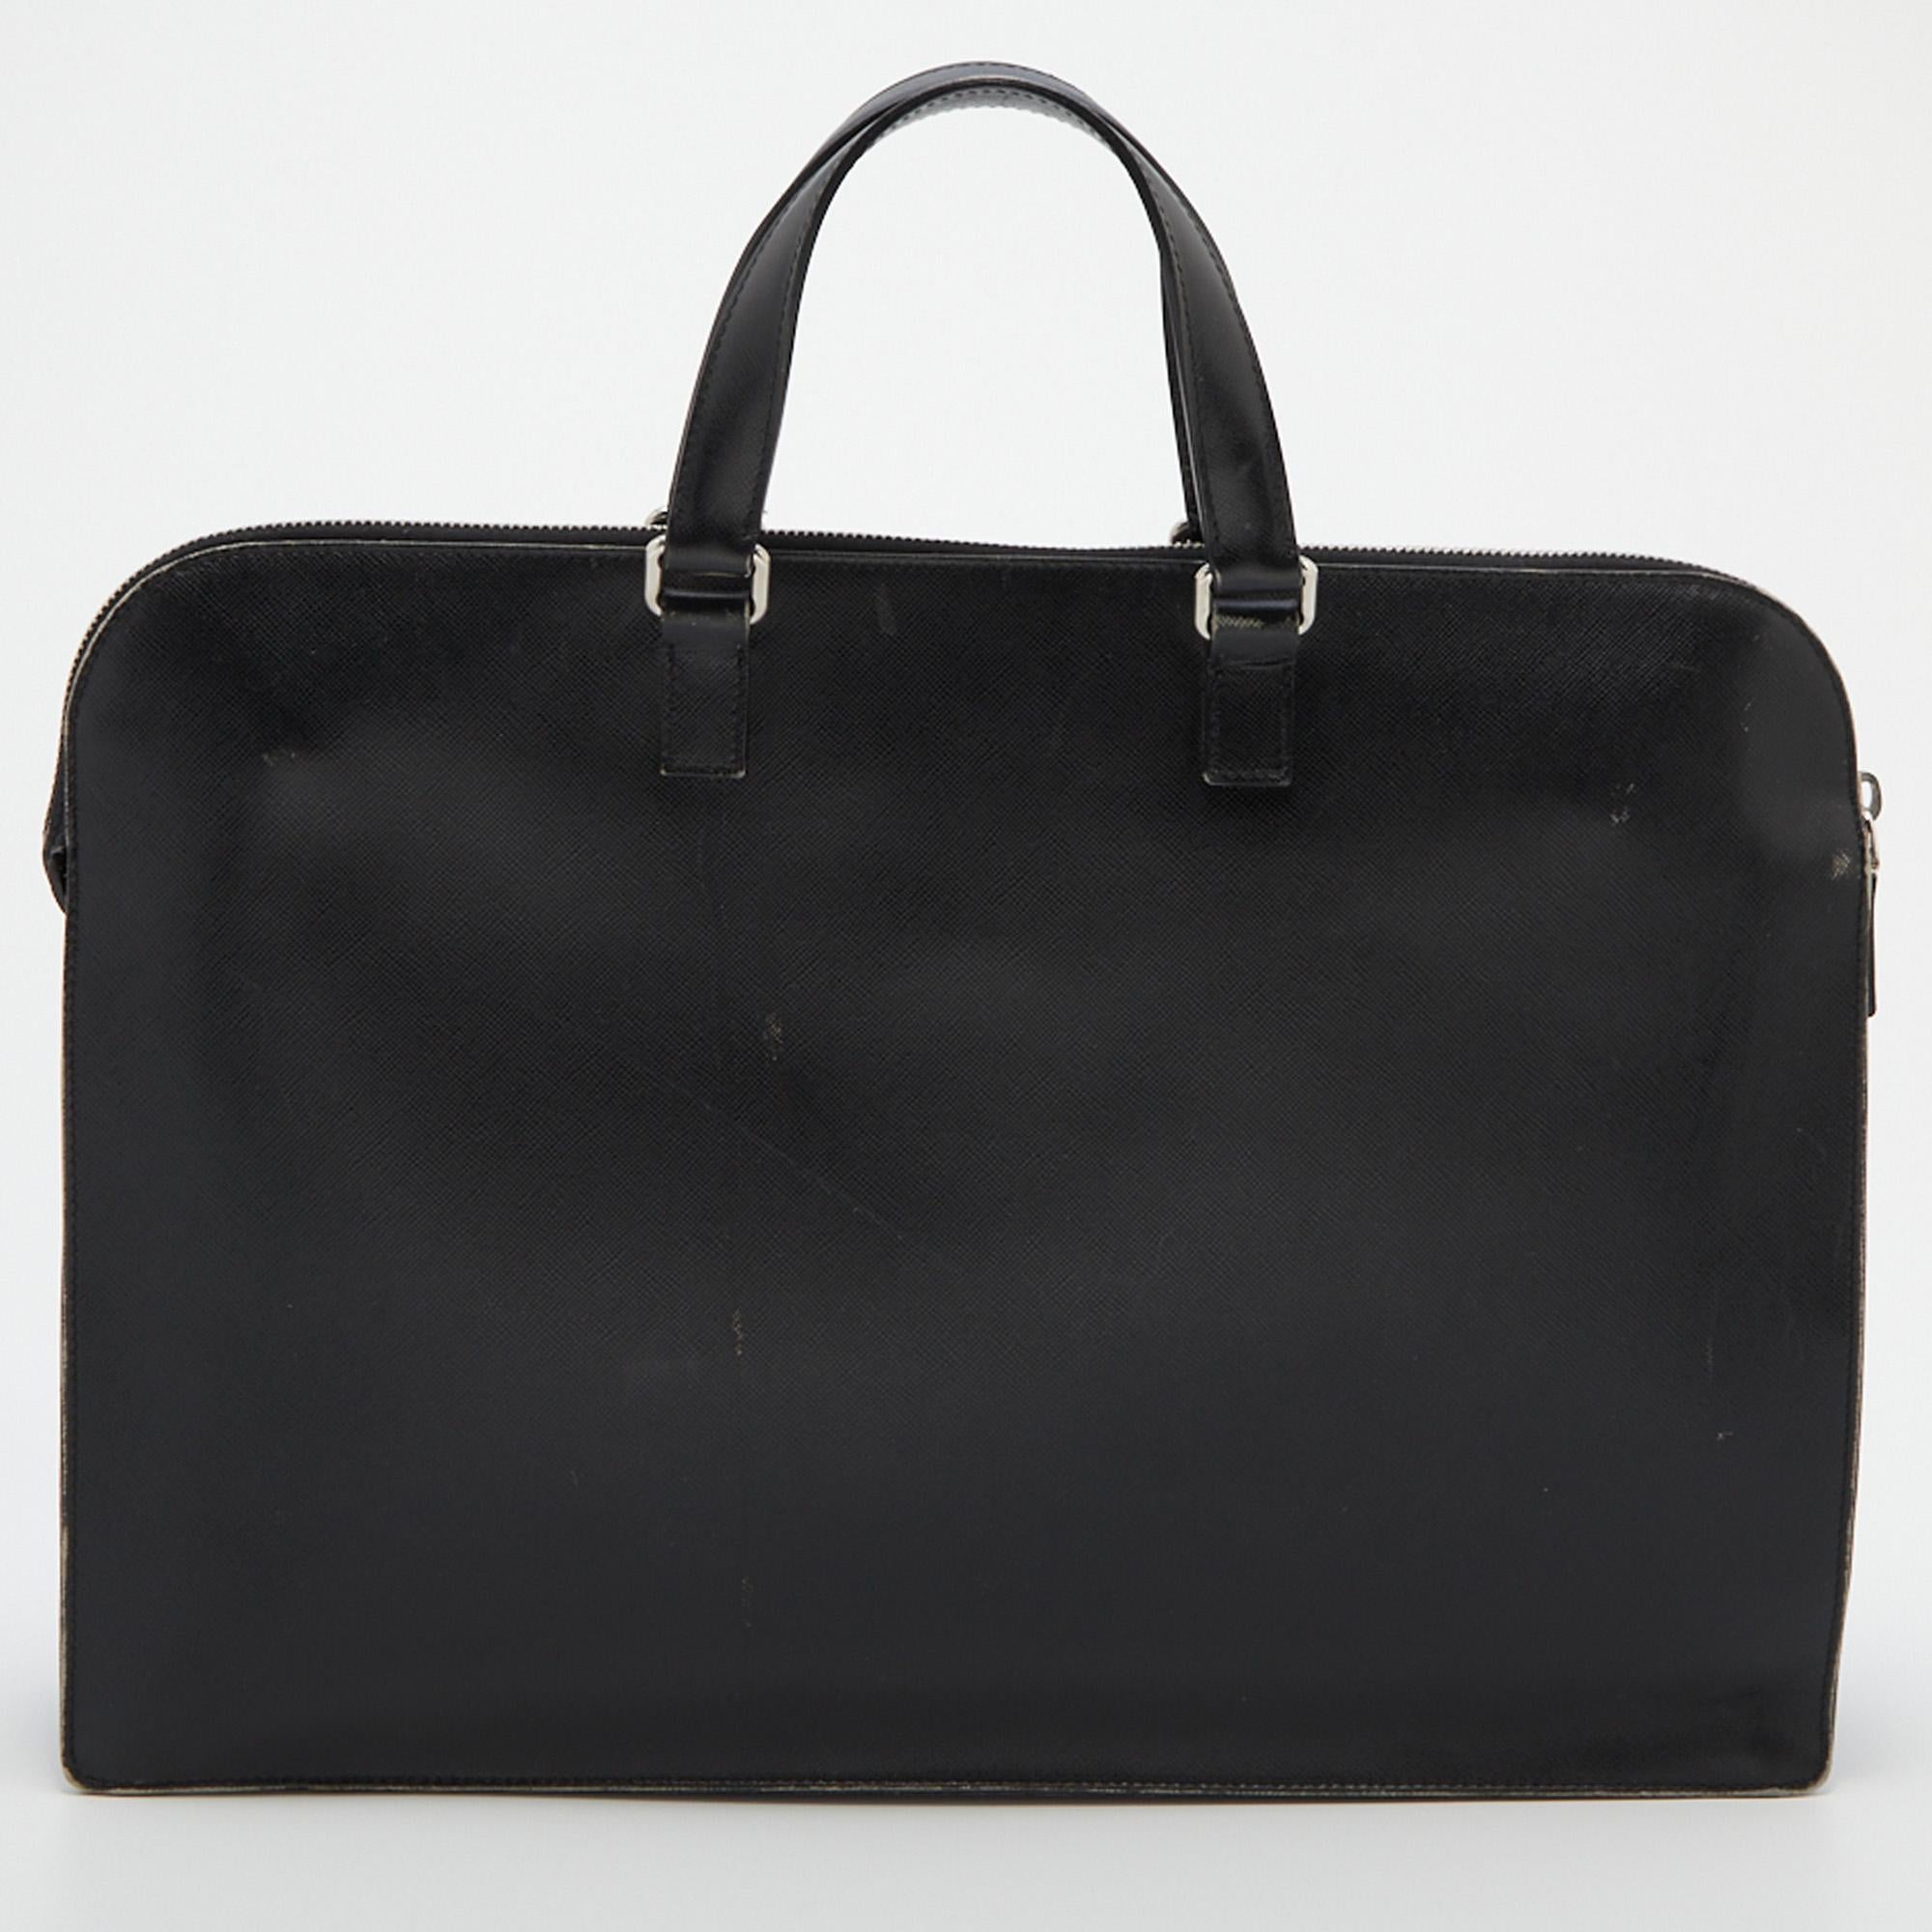 Your laptop needs to be stored safely, and what better choice than this designer laptop bag. Crafted from durable materials, you can also keep your work essentials carefully in it.

